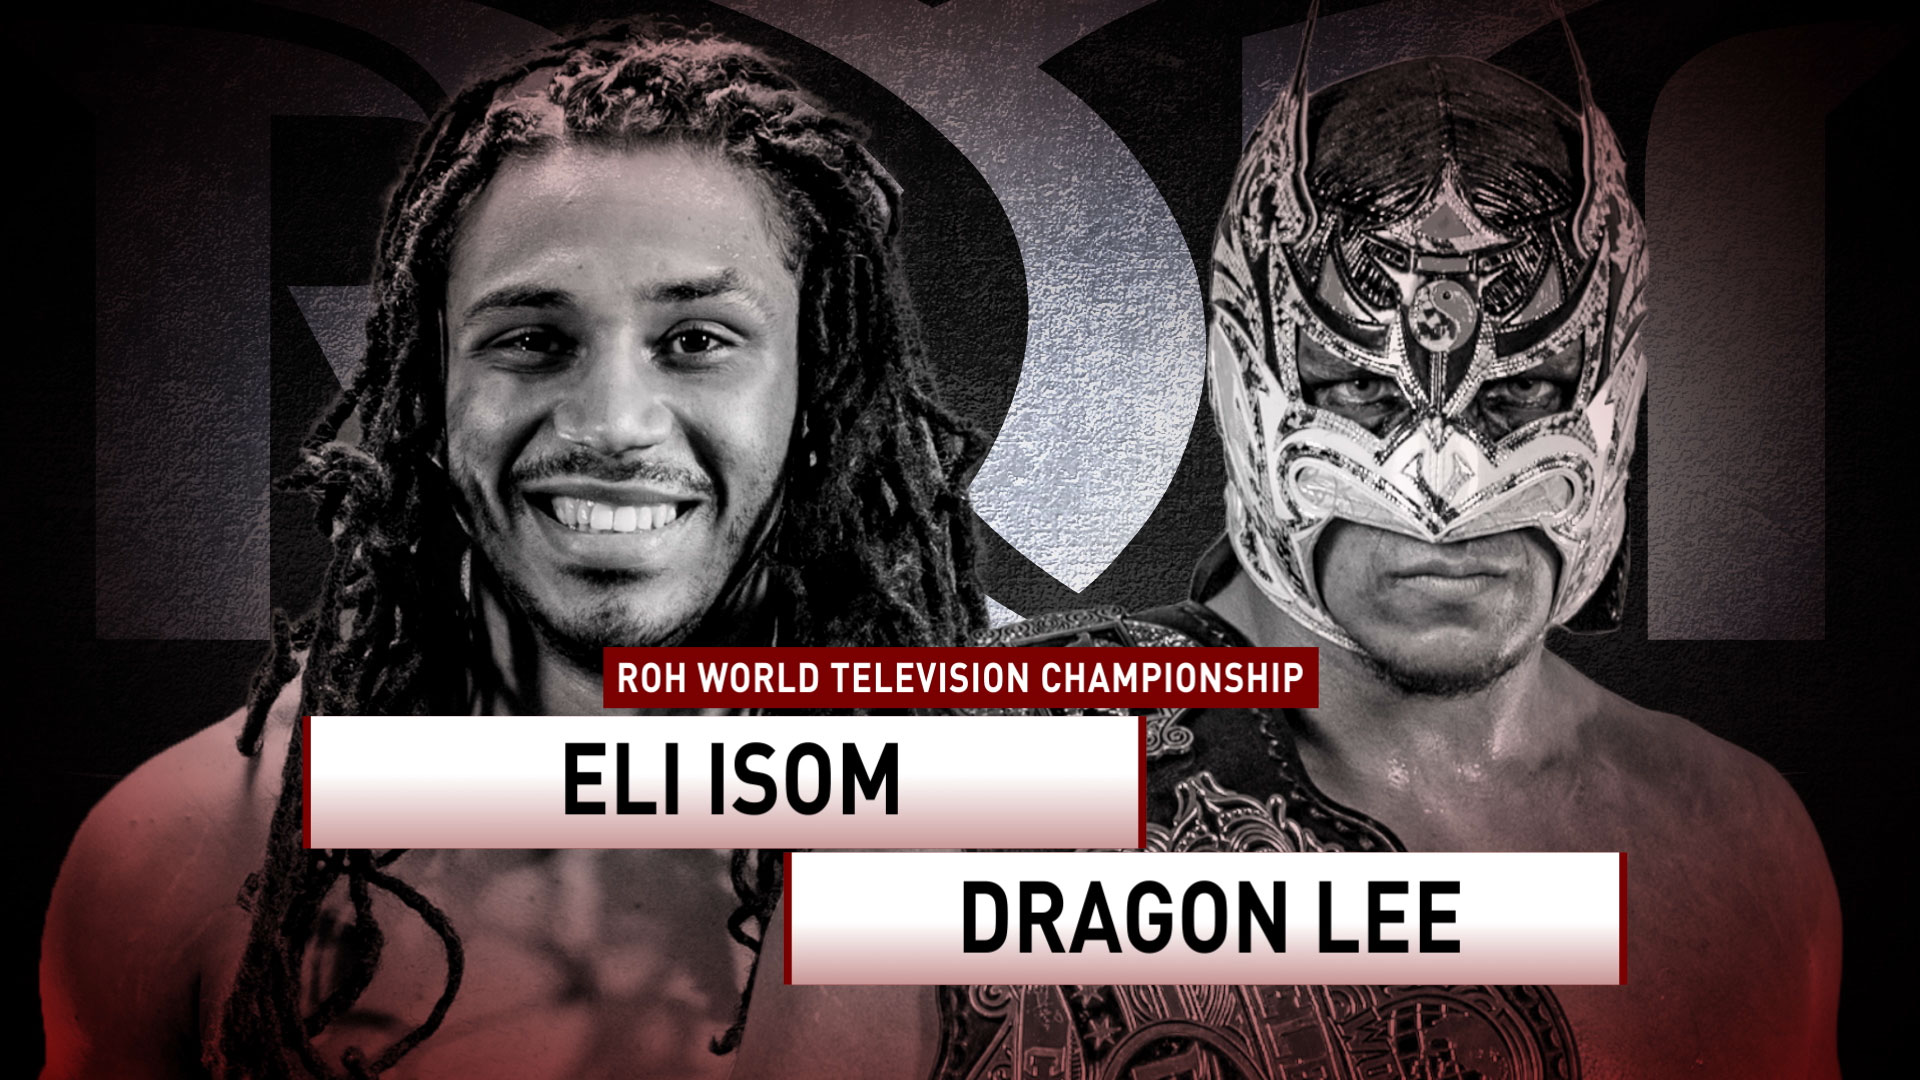 ROH TV EP519 Review Feat Dragon Lee vs Eli Isom For TV Title